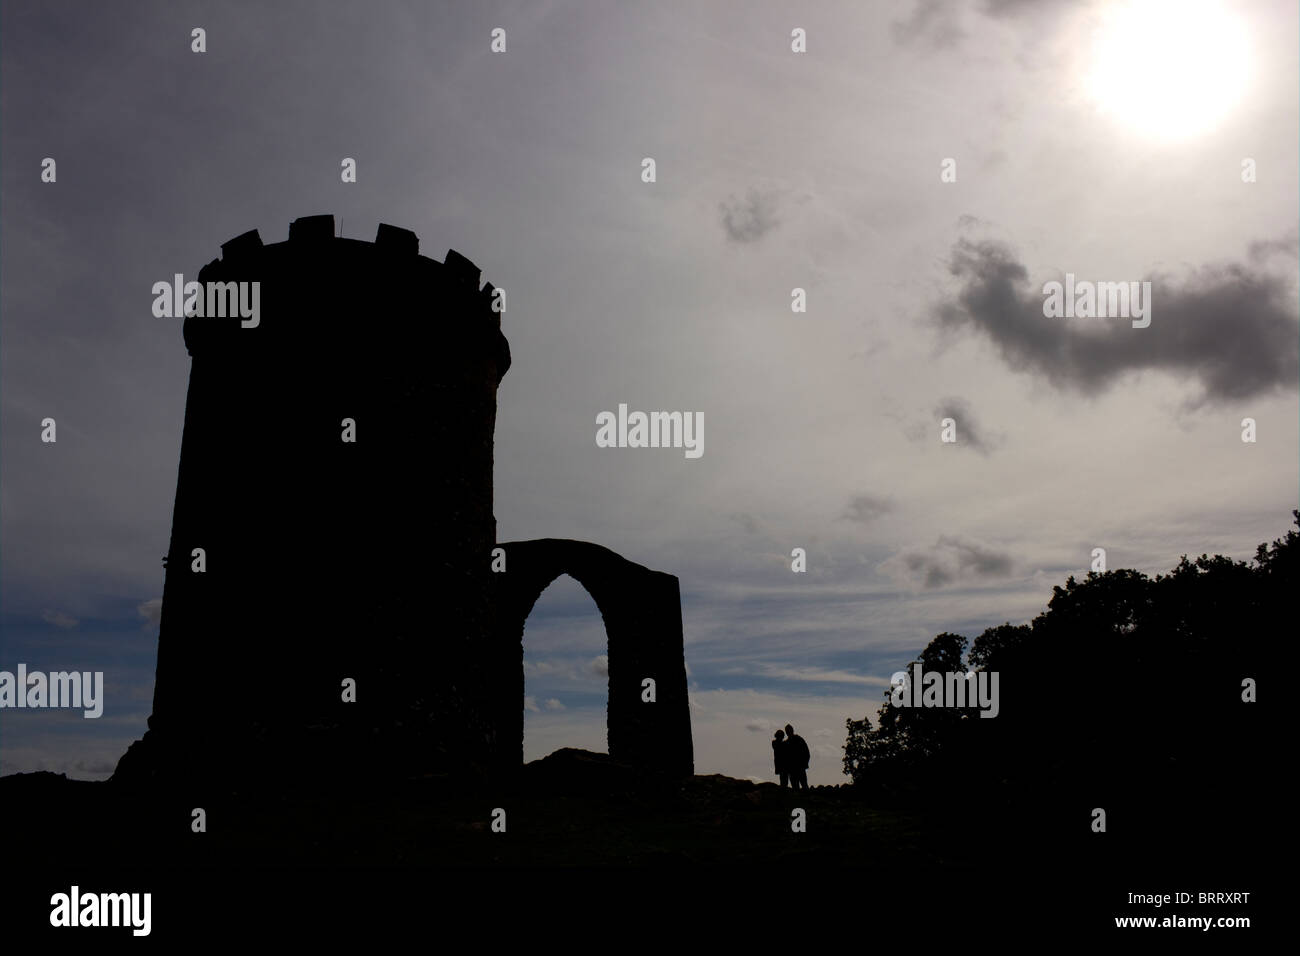 Sunlit silhouette of Old John and couple, Bradgate Park, Cropston, Leicestershire, England, UK Stock Photo